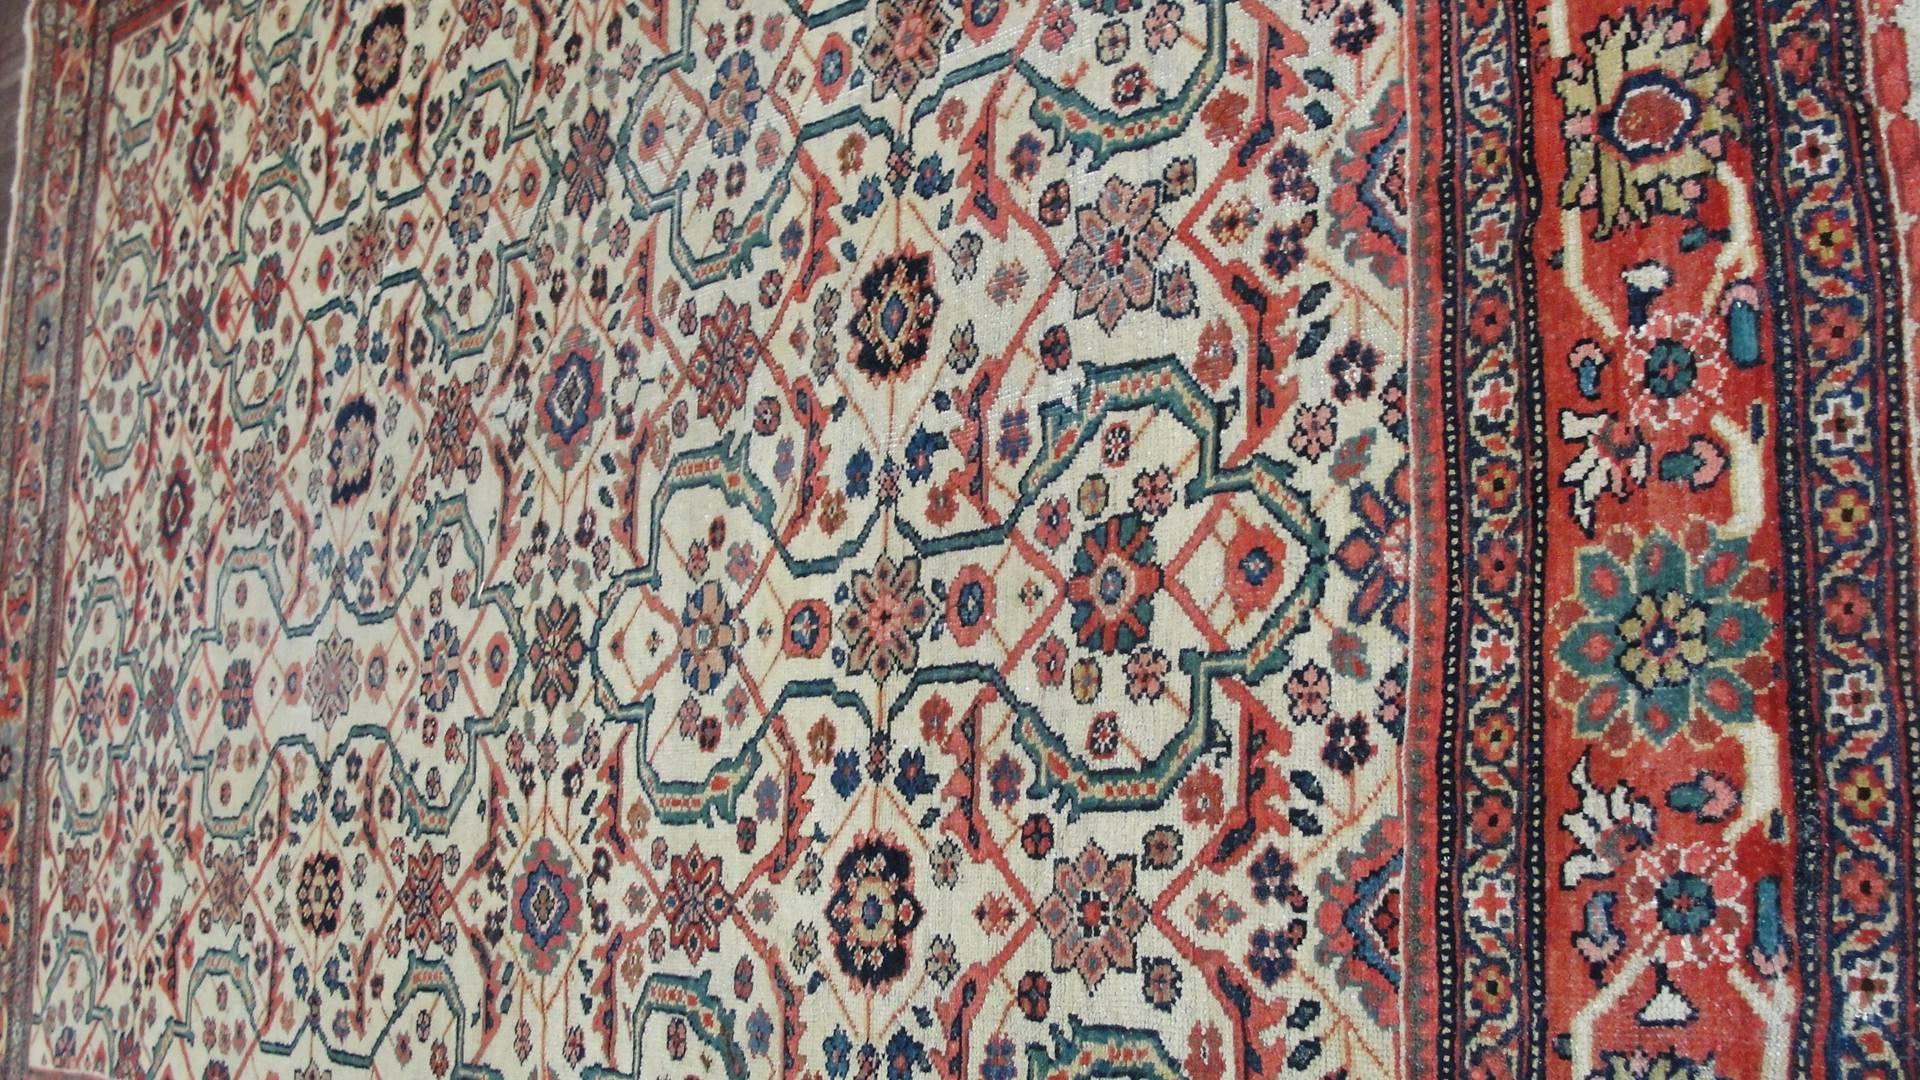  Antique Persian Sultanabad Carpet, 7' x 10' For Sale 1